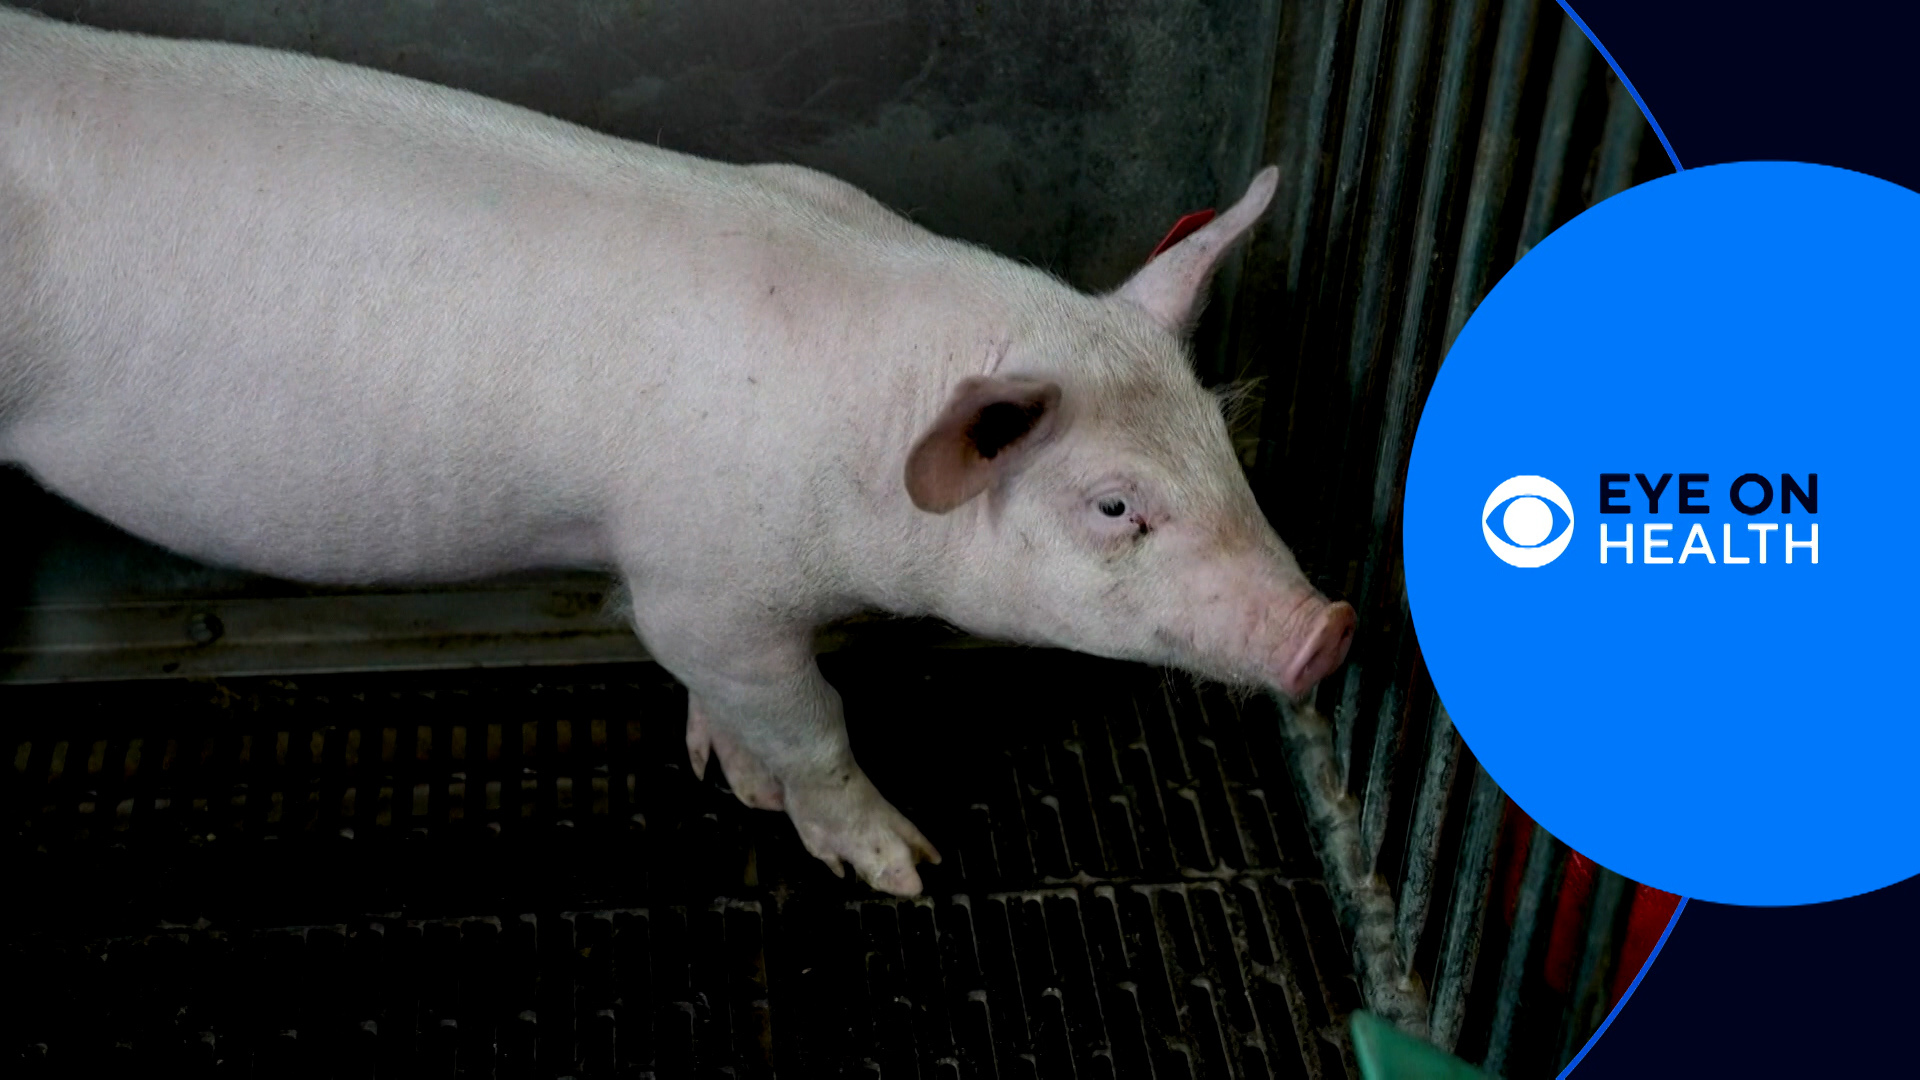 Eye on Health takes a look at the health stories that make news during the week. This week we look at pigs being raised for transplants, medical chatbots, and more.